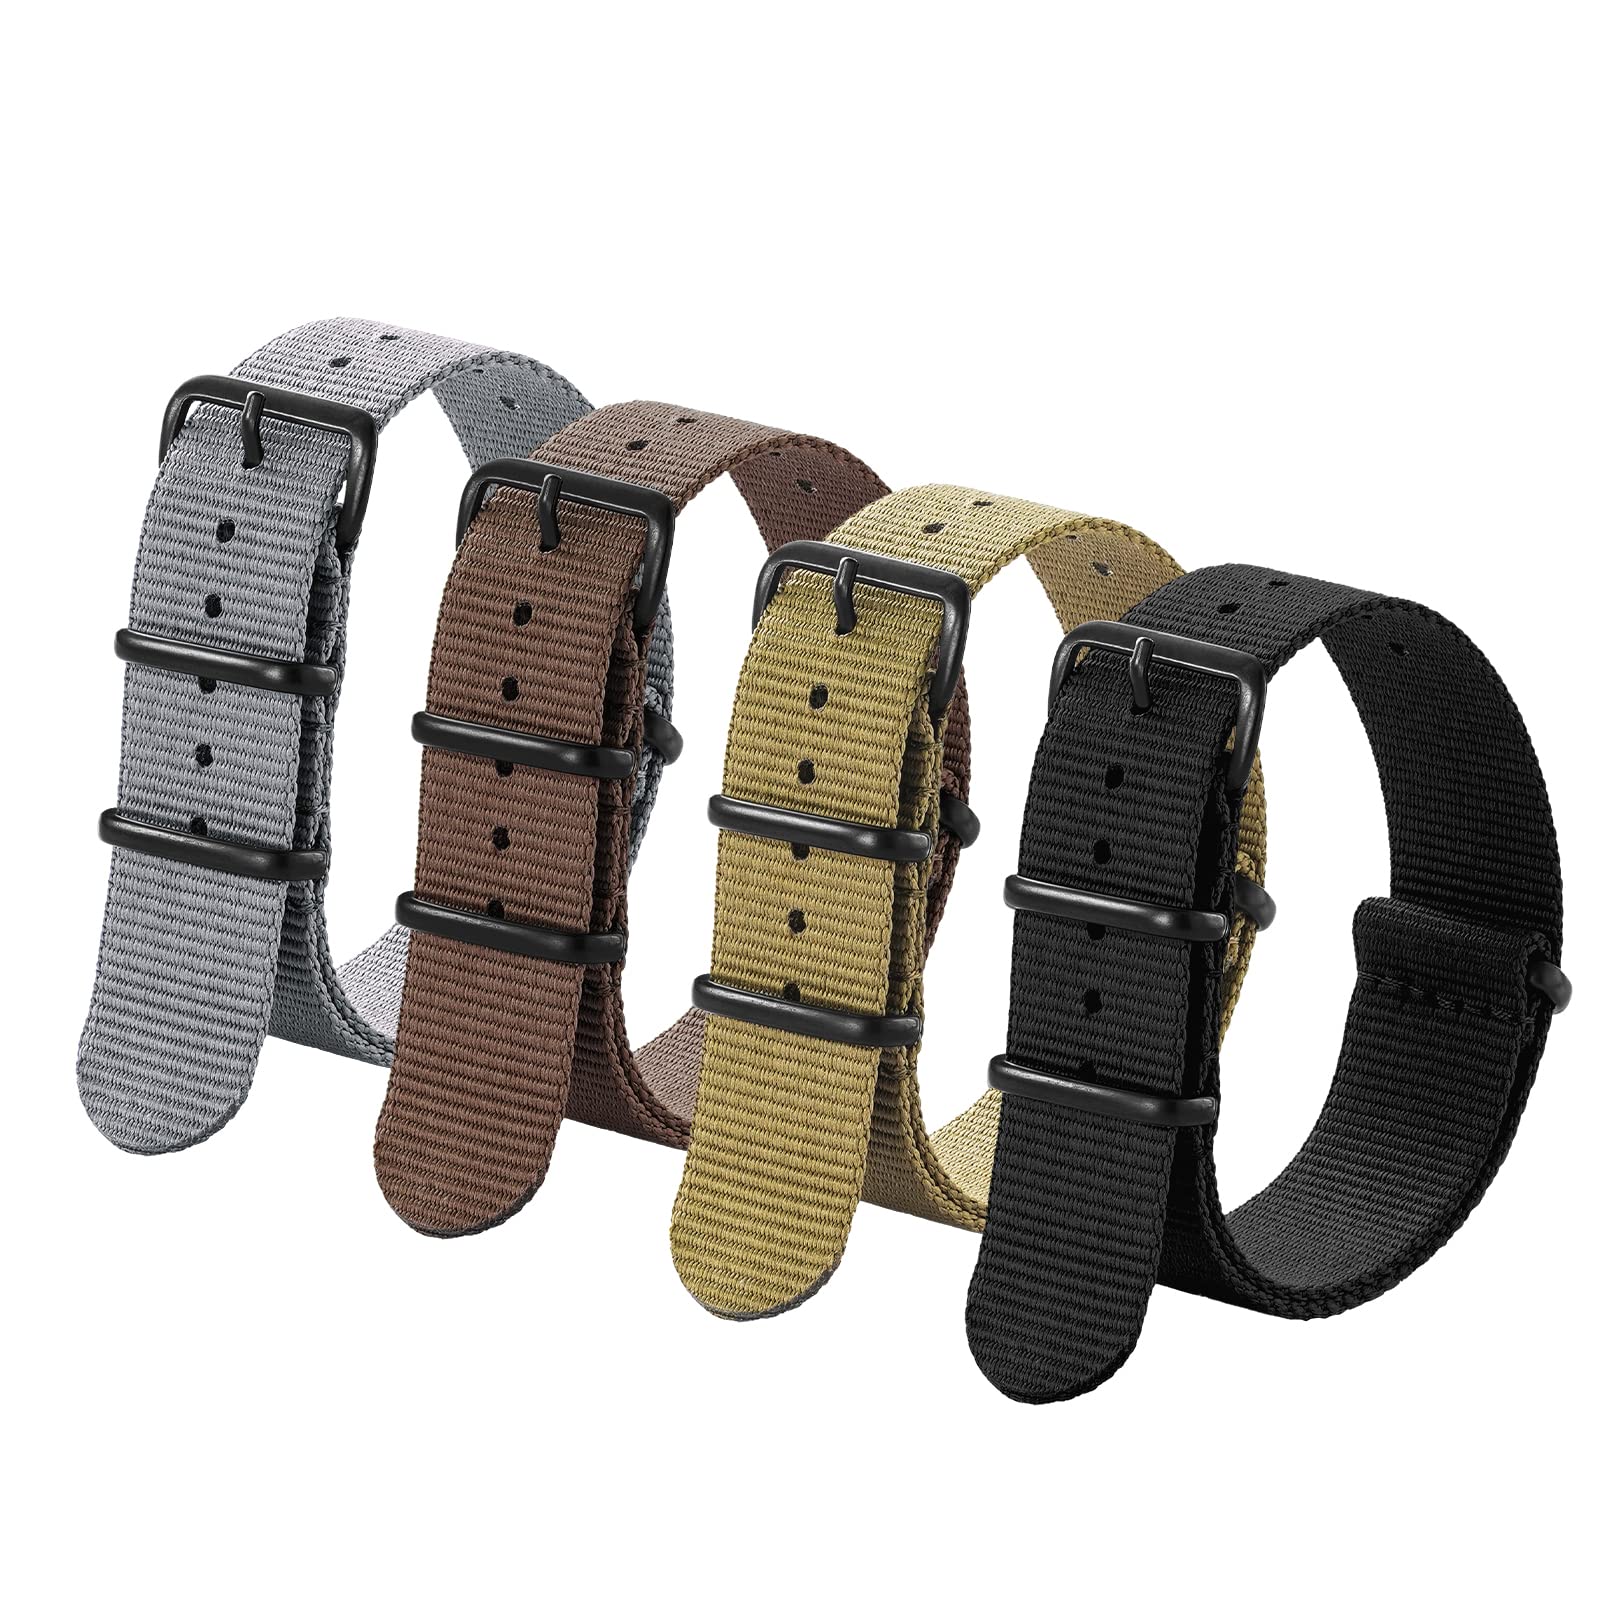 Ritche Military Ballistic Nylon Strap 16mm 18mm 20mm 22mm Premium Nylon Watch Band Strap With Stainless Steel Buckle (4 Packs)